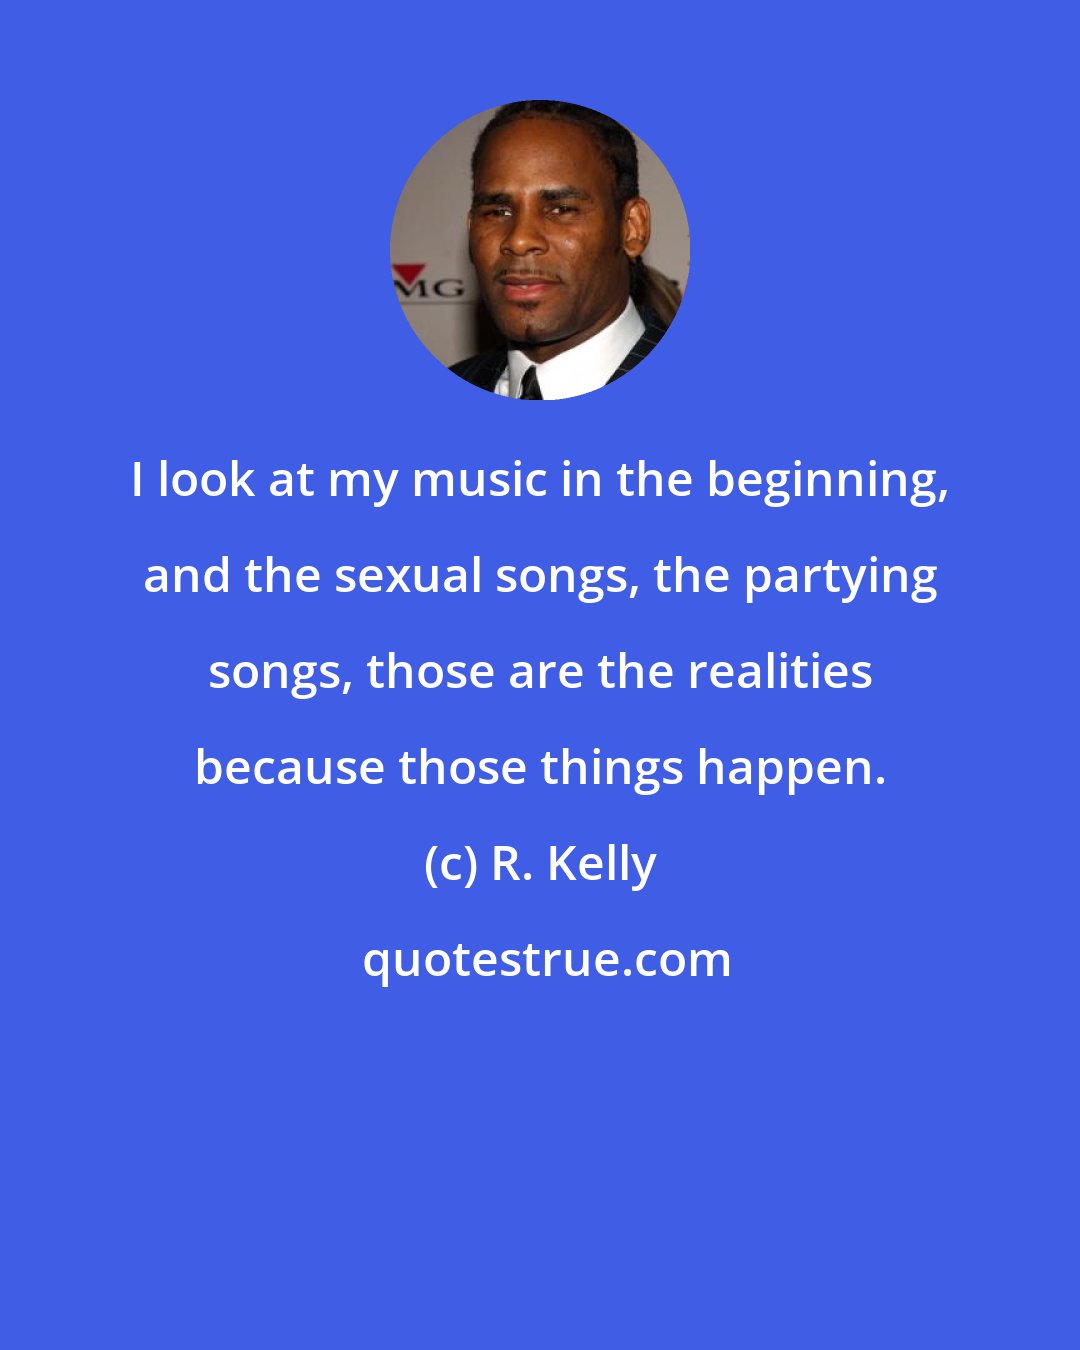 R. Kelly: I look at my music in the beginning, and the sexual songs, the partying songs, those are the realities because those things happen.